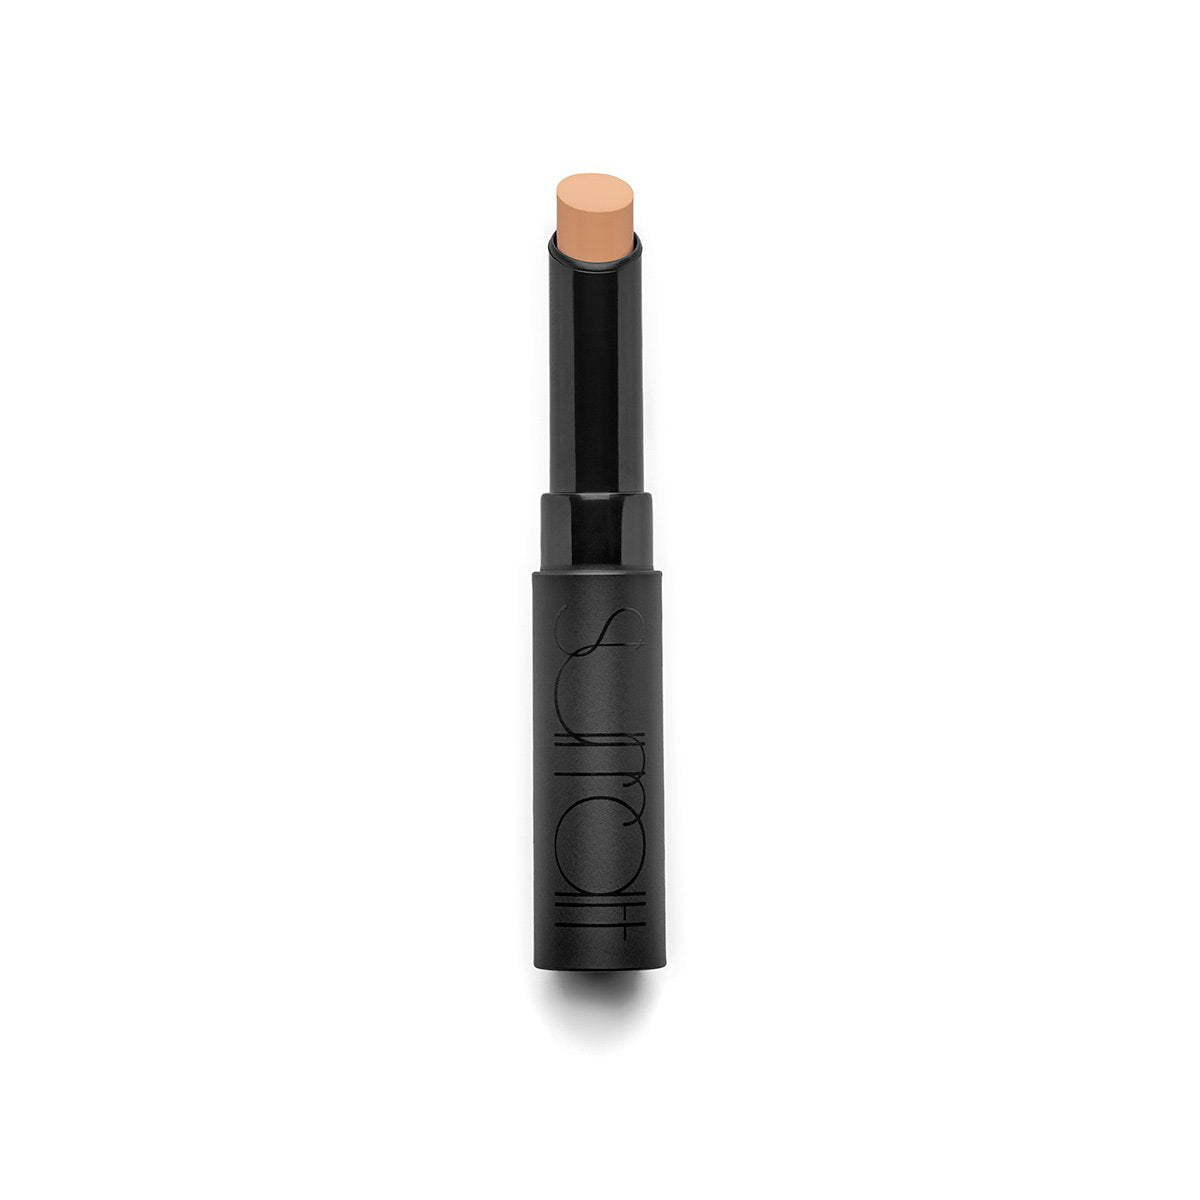 6 - TAN TO CARAMEL WITH PEACH TO WARM UNDERTONES - full-coverage cream concealer stick in tan to caramel with peach to warm undertones shade six